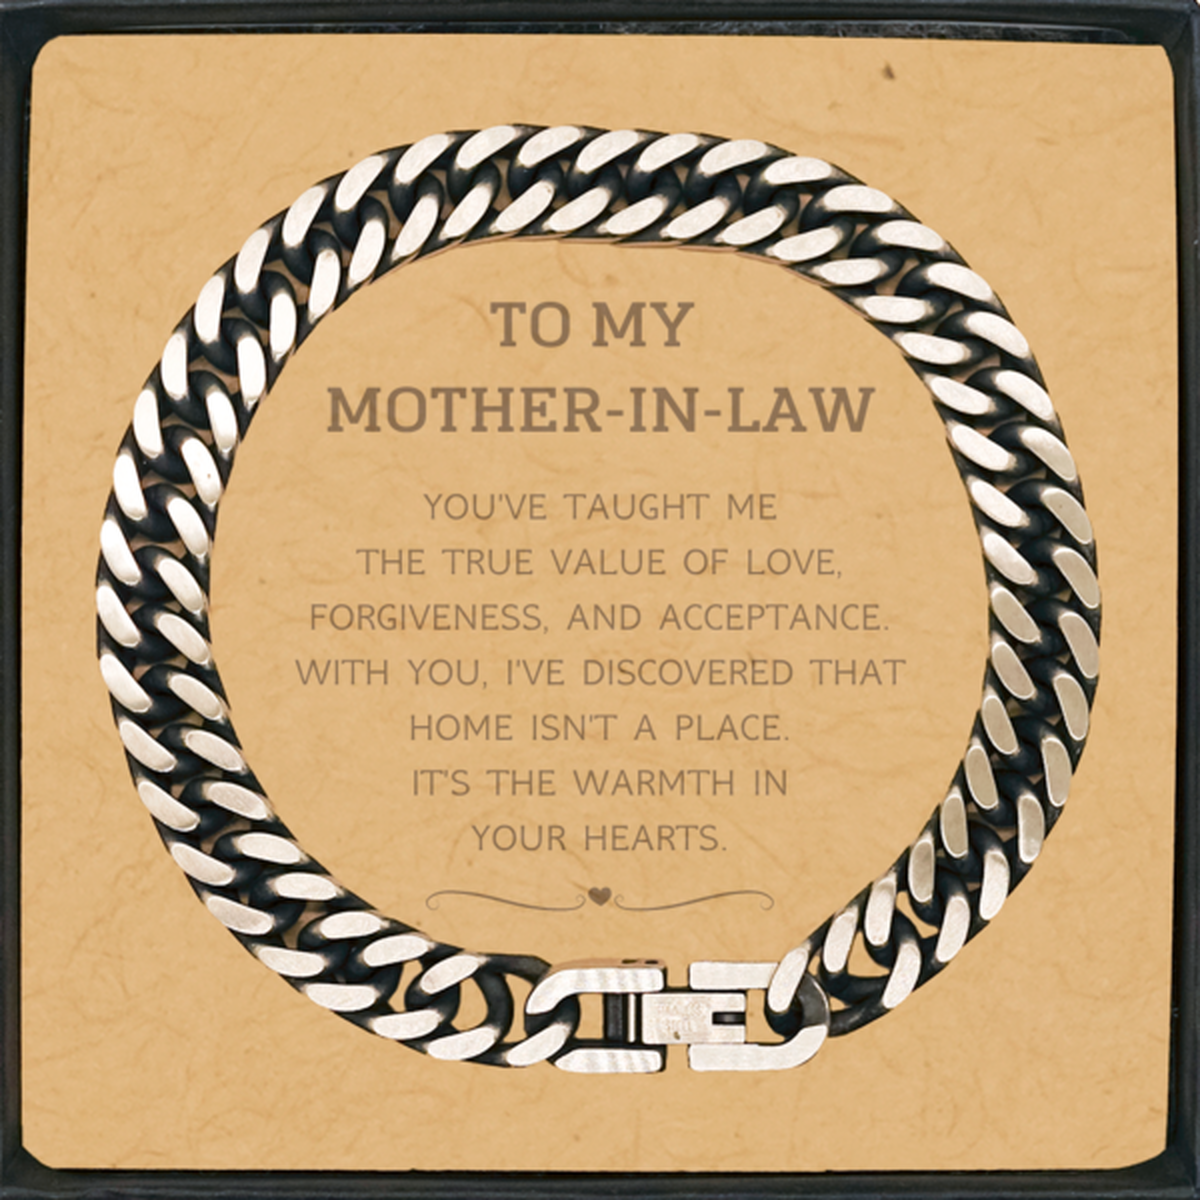 To My Mother-In-Law Gifts, You've taught me the true value of love, Thank You Gifts For Mother-In-Law, Birthday Cuban Link Chain Bracelet For Mother-In-Law